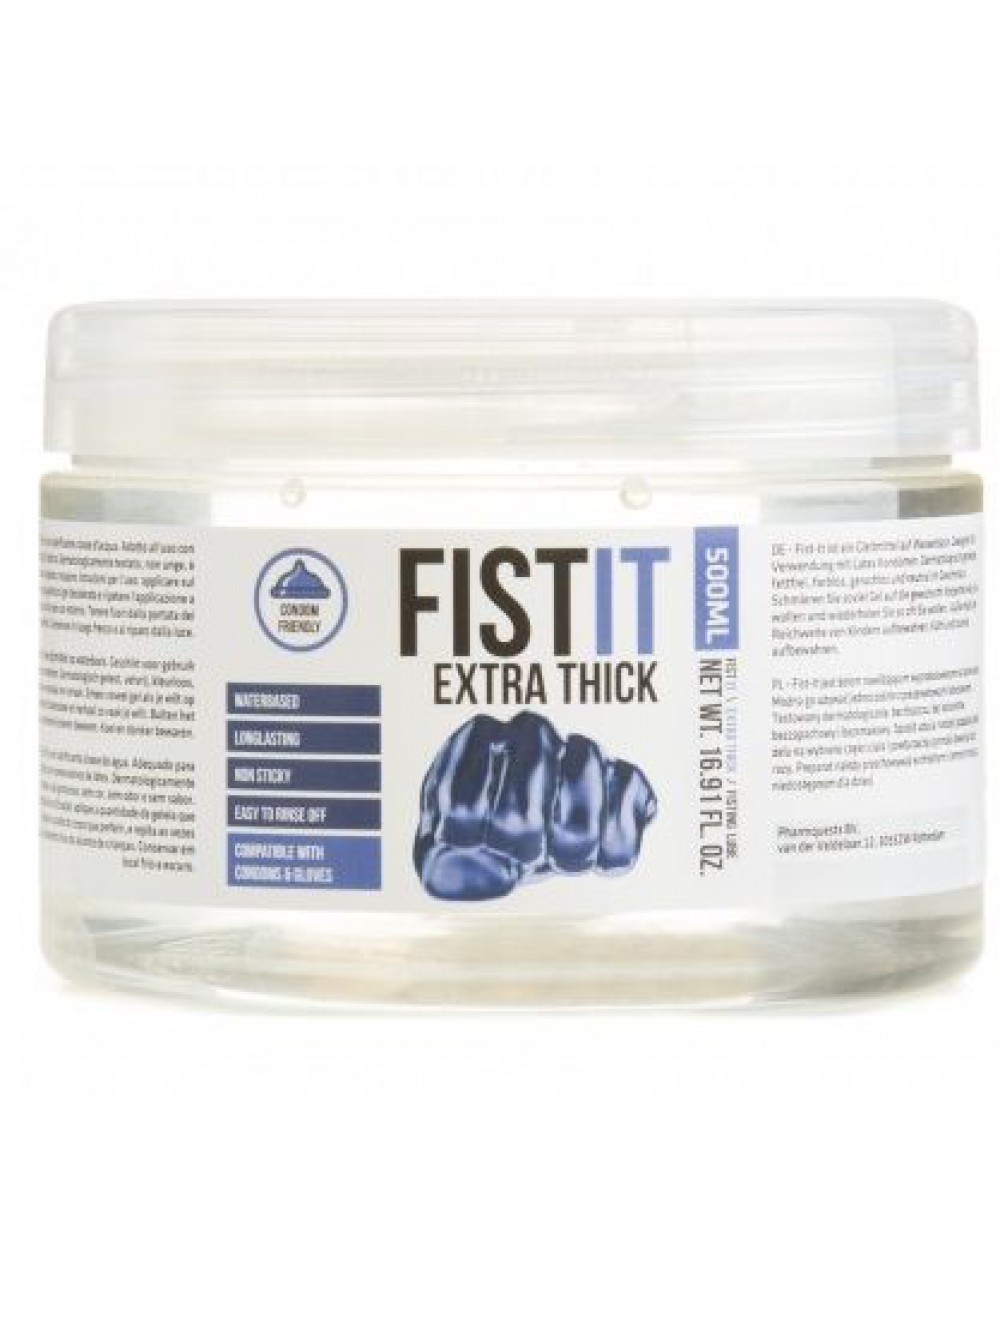 PHARMAQUEST FIST IT EXTRA THICK 500ML 8714273071194